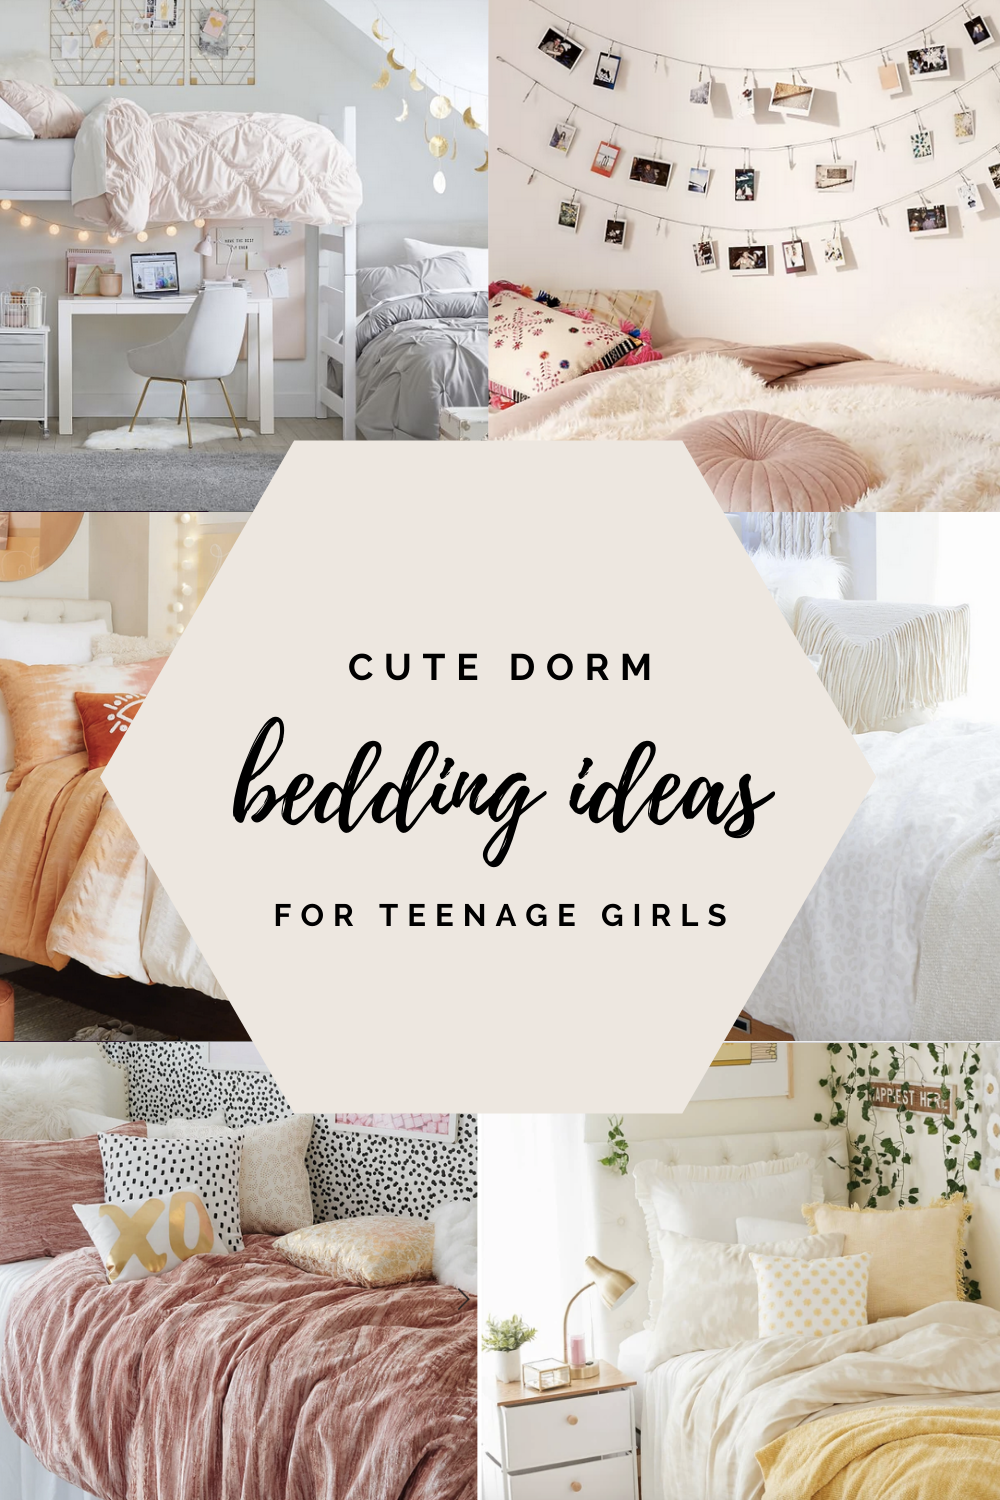 Dorm Decorating Ideas for Girls featured y top AL home blogger, She Gave It A Go